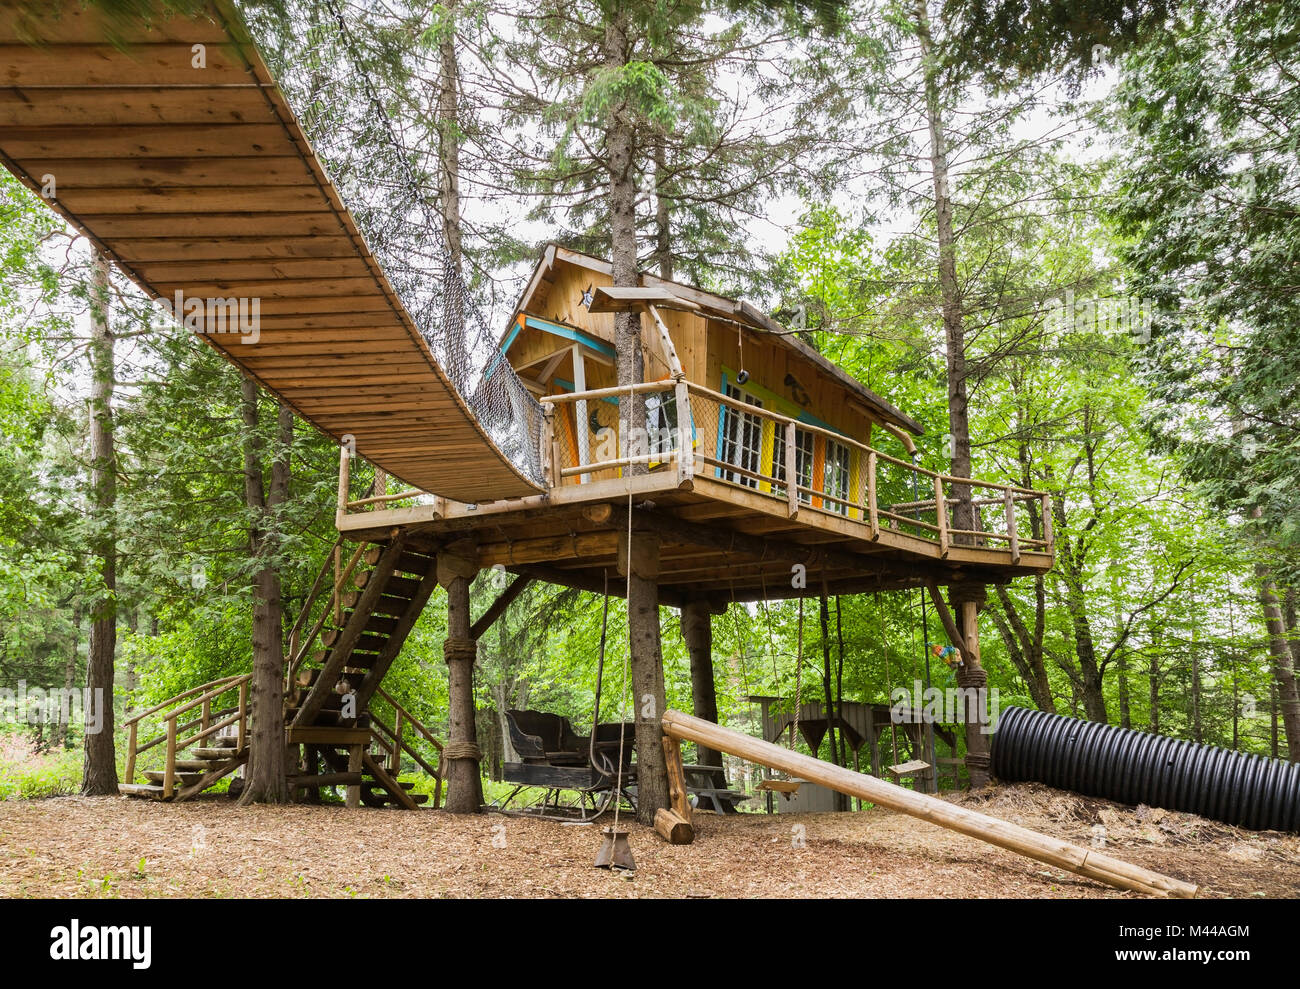 Children's playground and tree house, in residential garden, Quebec, Canada Stock Photo